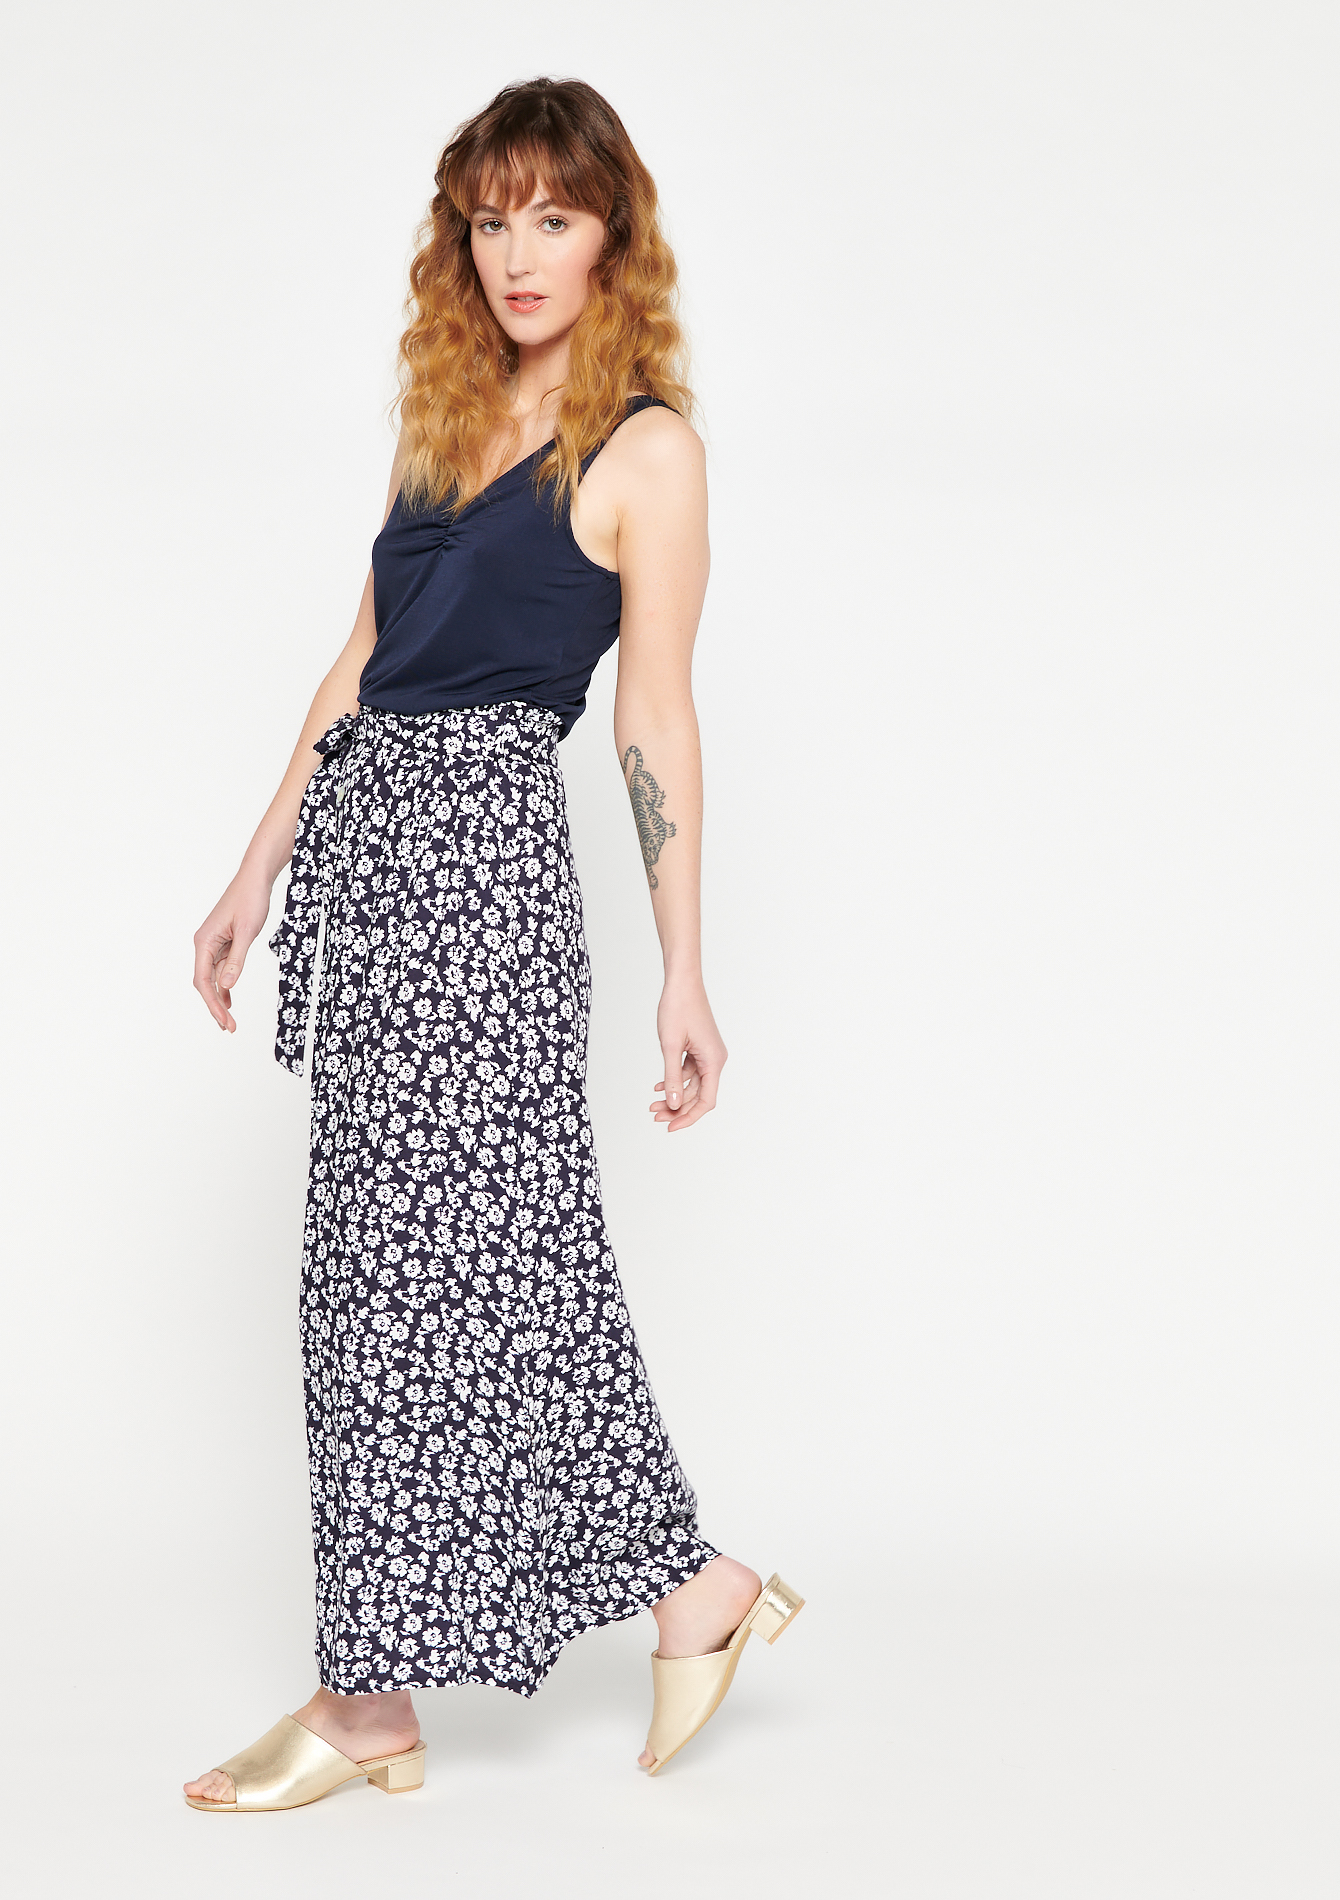 Jupe fleurie avec noeud - WASHED NAVY - 07100677_2722